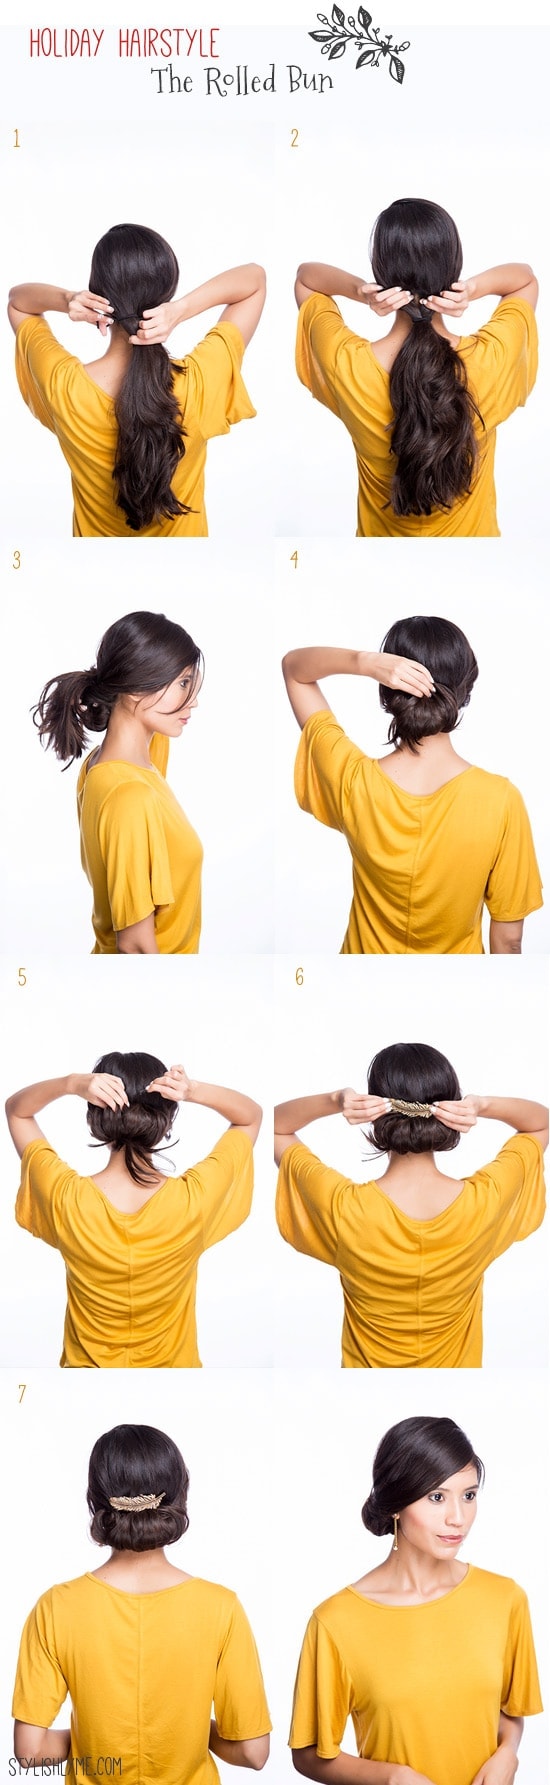 Holiday Hairstyle Tutorial - The Low Rolled Bun